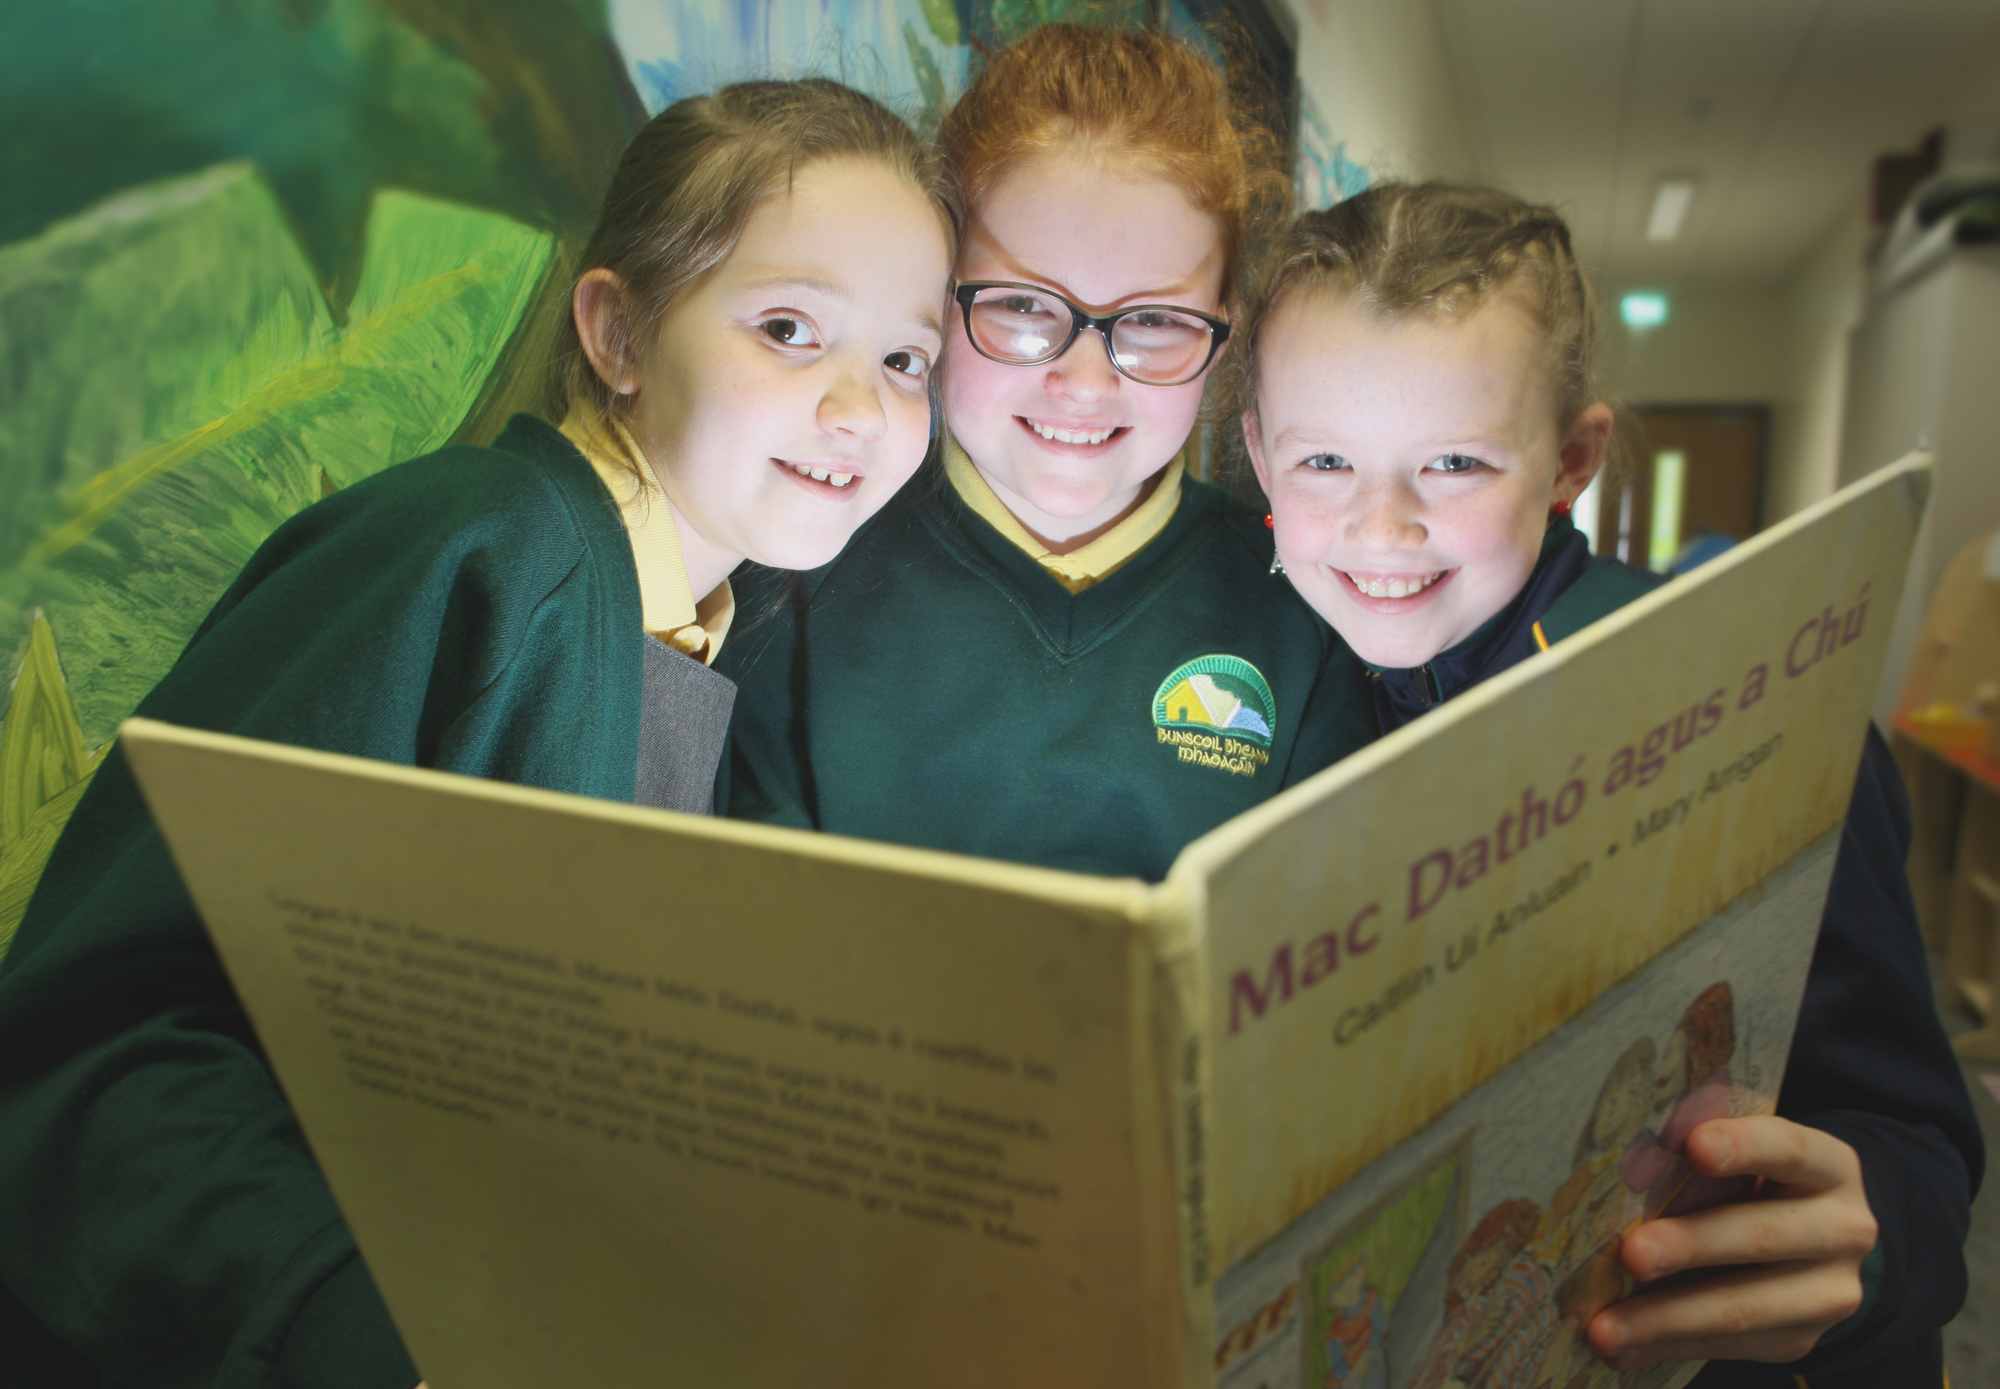 Catching up on a bit of light reading are Bunscoil Bheann Mhadagin pupils Aoibhe Clarke, Cadhla O\' Riordan and Clodagh Brownlee